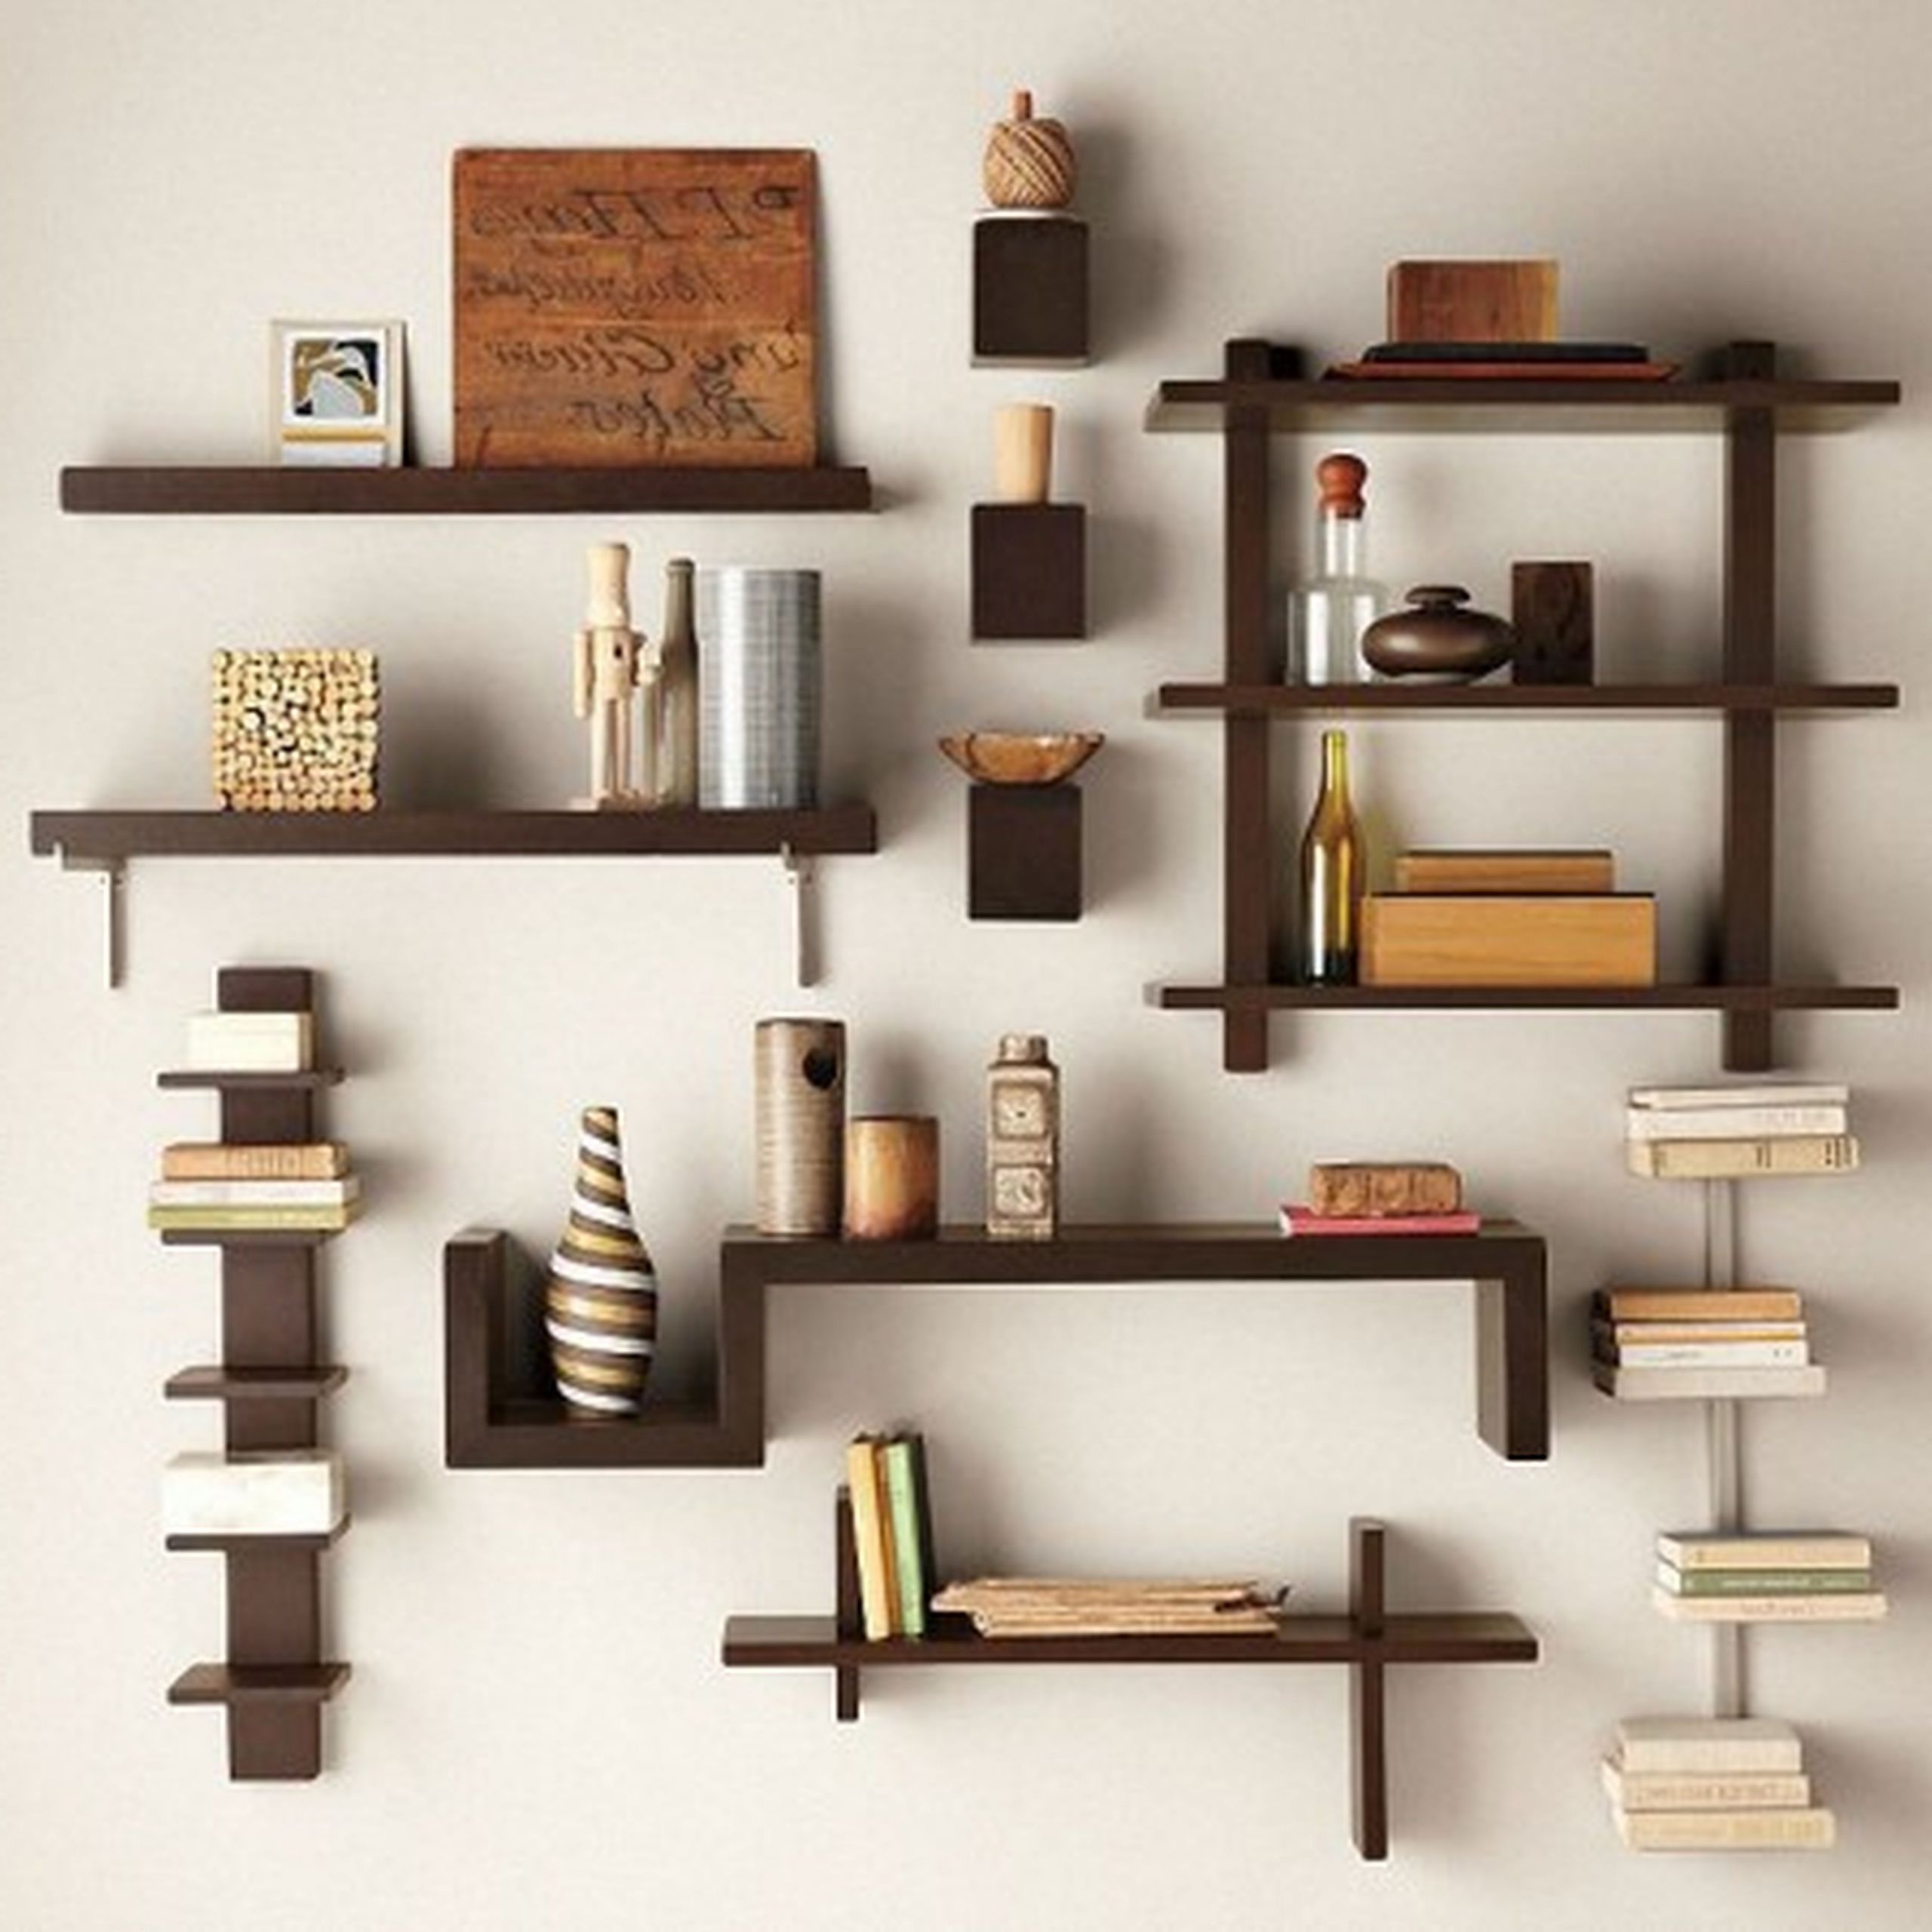 Living Room Wall Shelf
 Decorate Rooms with Decorative Shelving Unit – HomesFeed